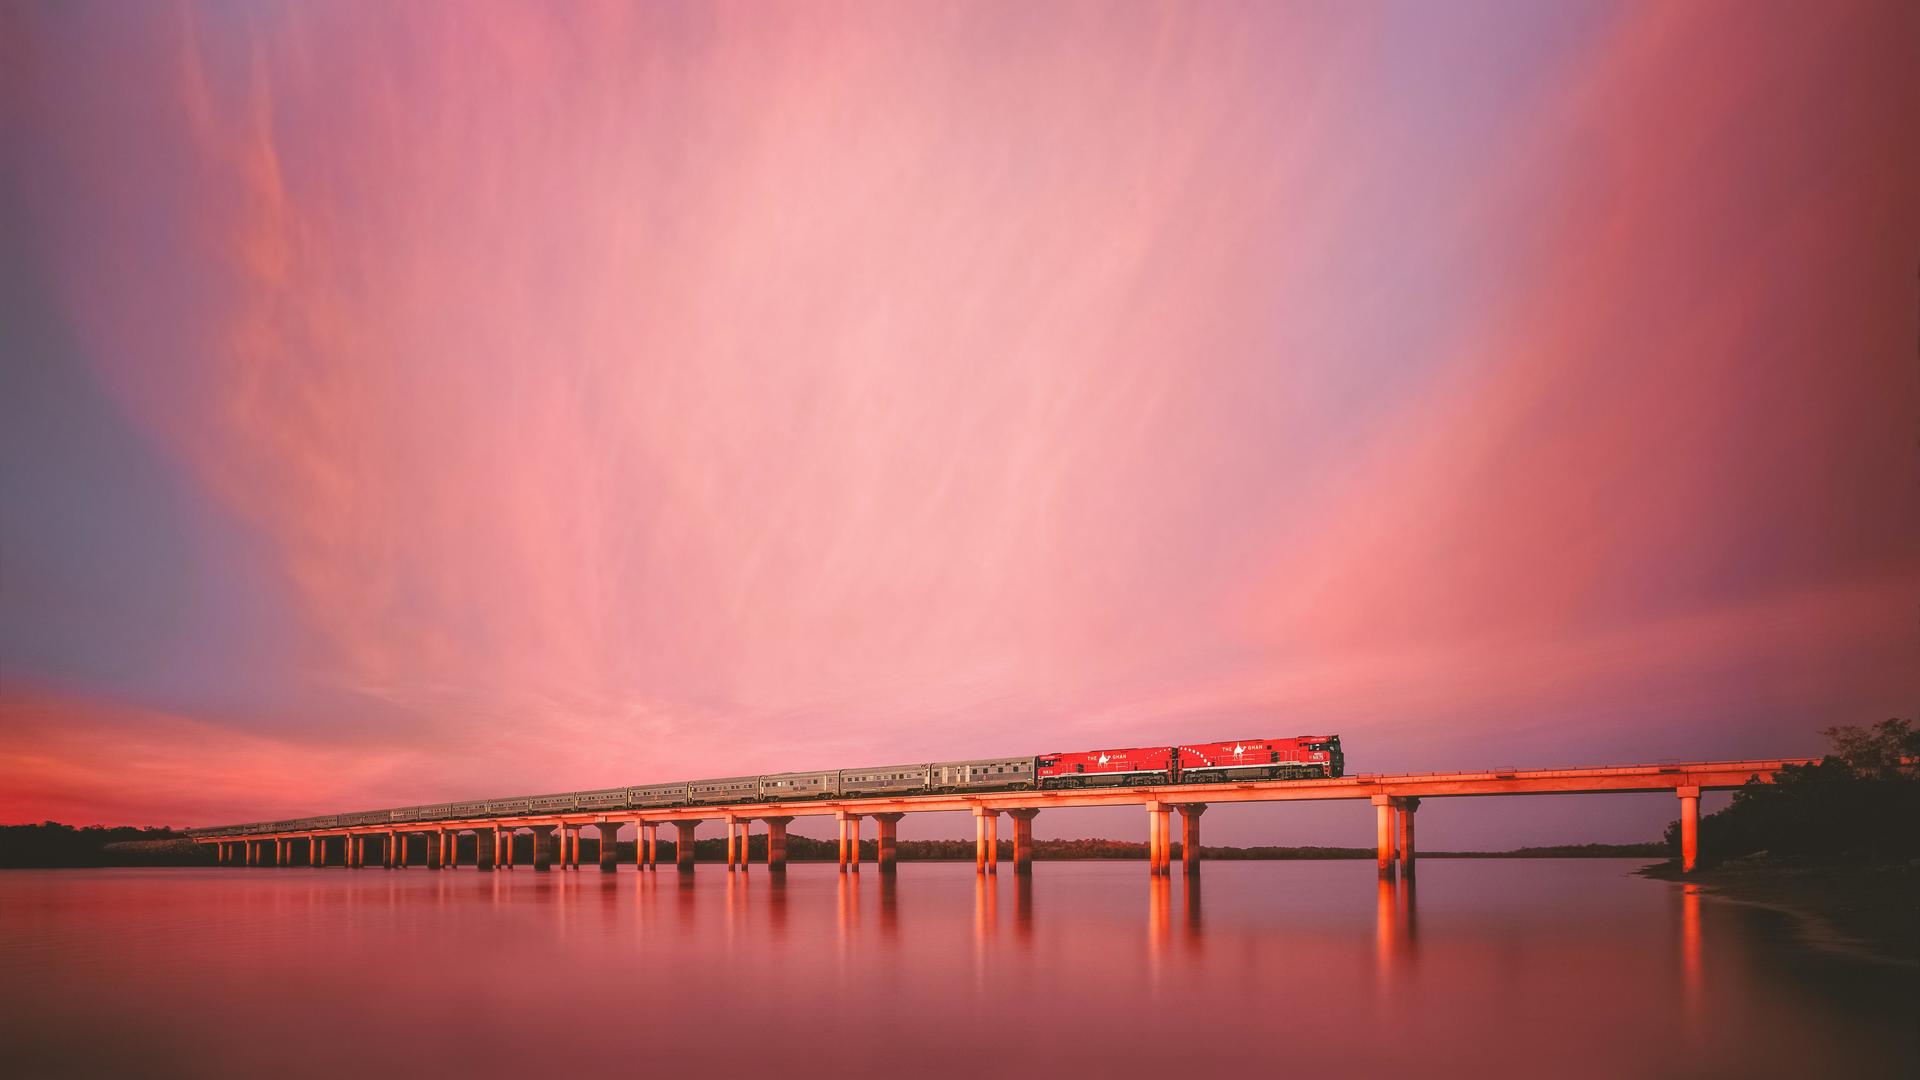 <p>Embark on an epic journey through the heart of Australia aboard The Ghan. This legendary train travels from Darwin in the north to Adelaide in the south,  showcasing the vast and diverse l<a href="https://www.australia.com/en/things-to-do/nature-and-national-parks/guide-to-the-australian-outback.html">andscapes of the Outback</a>. Experience the red desert, tropical forests, and the raw, rugged beauty of Australia’s interior. Enjoy comfortable accommodations, gourmet meals, and off-train excursions that bring you closer to the wonders of the Outback, giving you a true taste of the land Down Under. Moreover, stops like Alice Springs let you explore iconic Outback towns and learn about Aboriginal cultures that have thrived in these landscapes for thousands of years.</p>